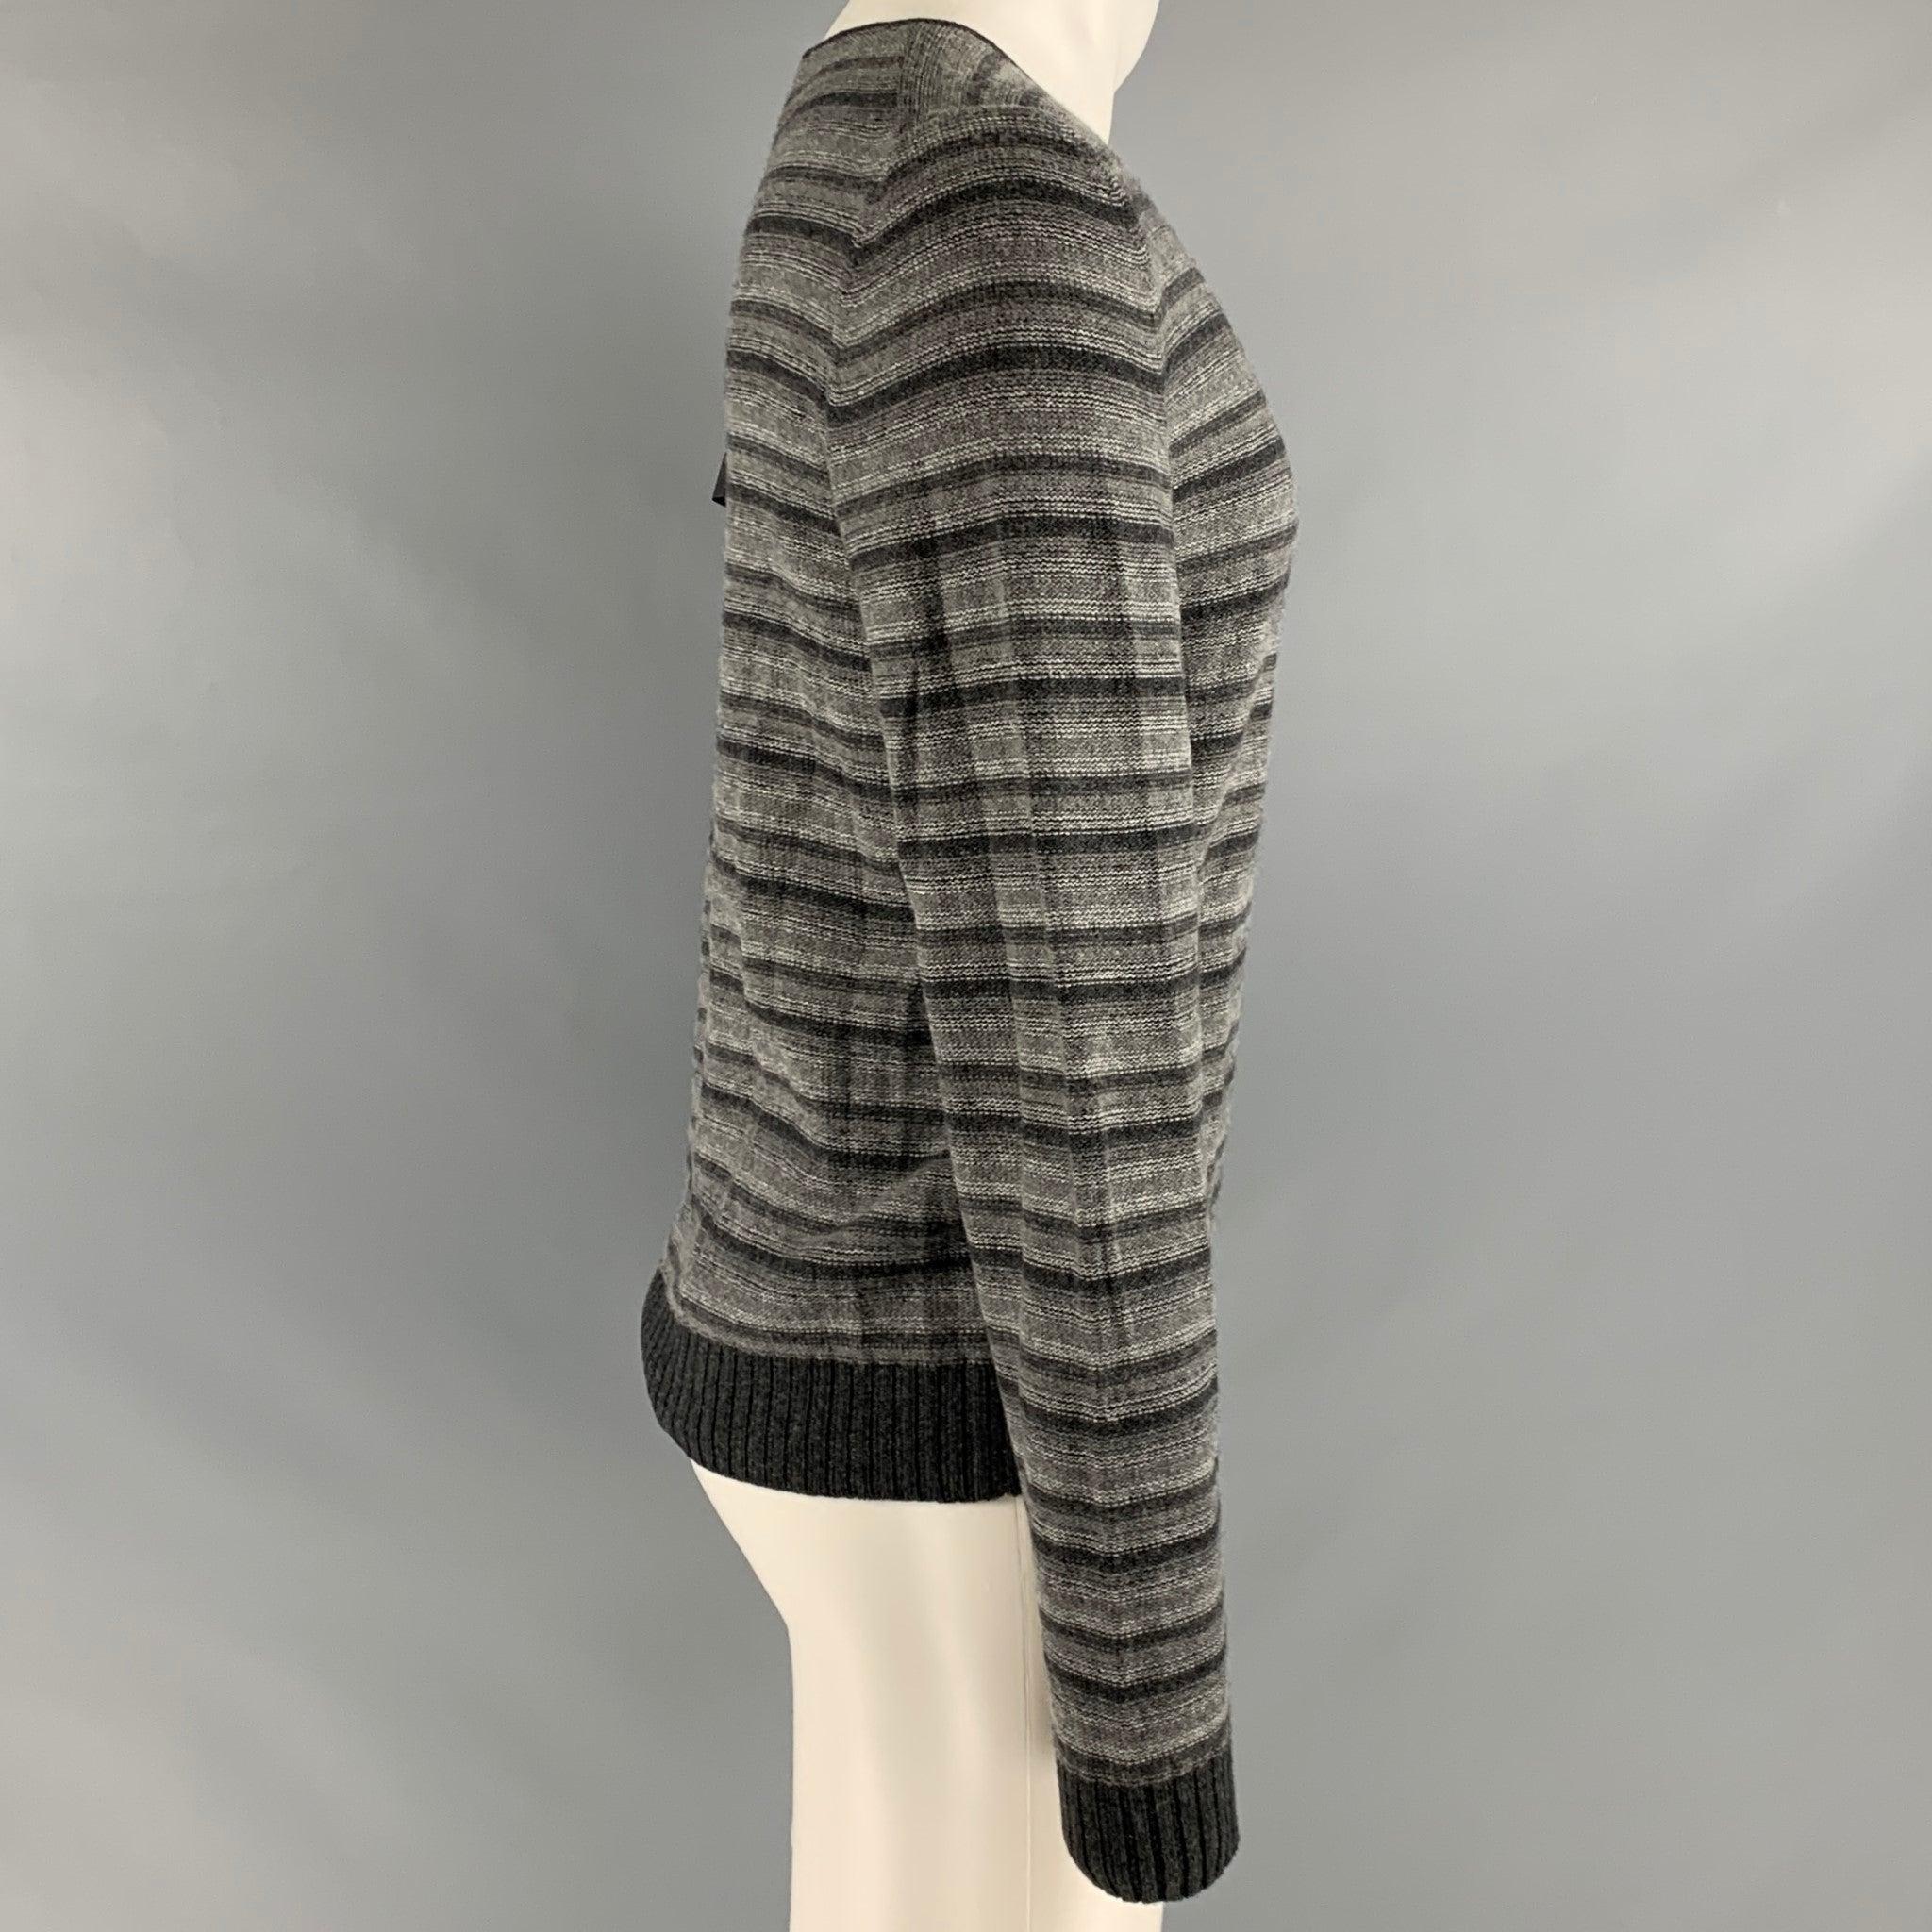 ERMENEGILDO ZEGNA
pullover in a grey cotton blend knit fabric featuring a horizontal stripe pattern, and a crew-neck. Made in Italy.Good Pre-Owned Condition. Moderate pilling. 

Marked:   M 

Measurements: 
 
Shoulder: 18.5 inches Chest: 40 inches